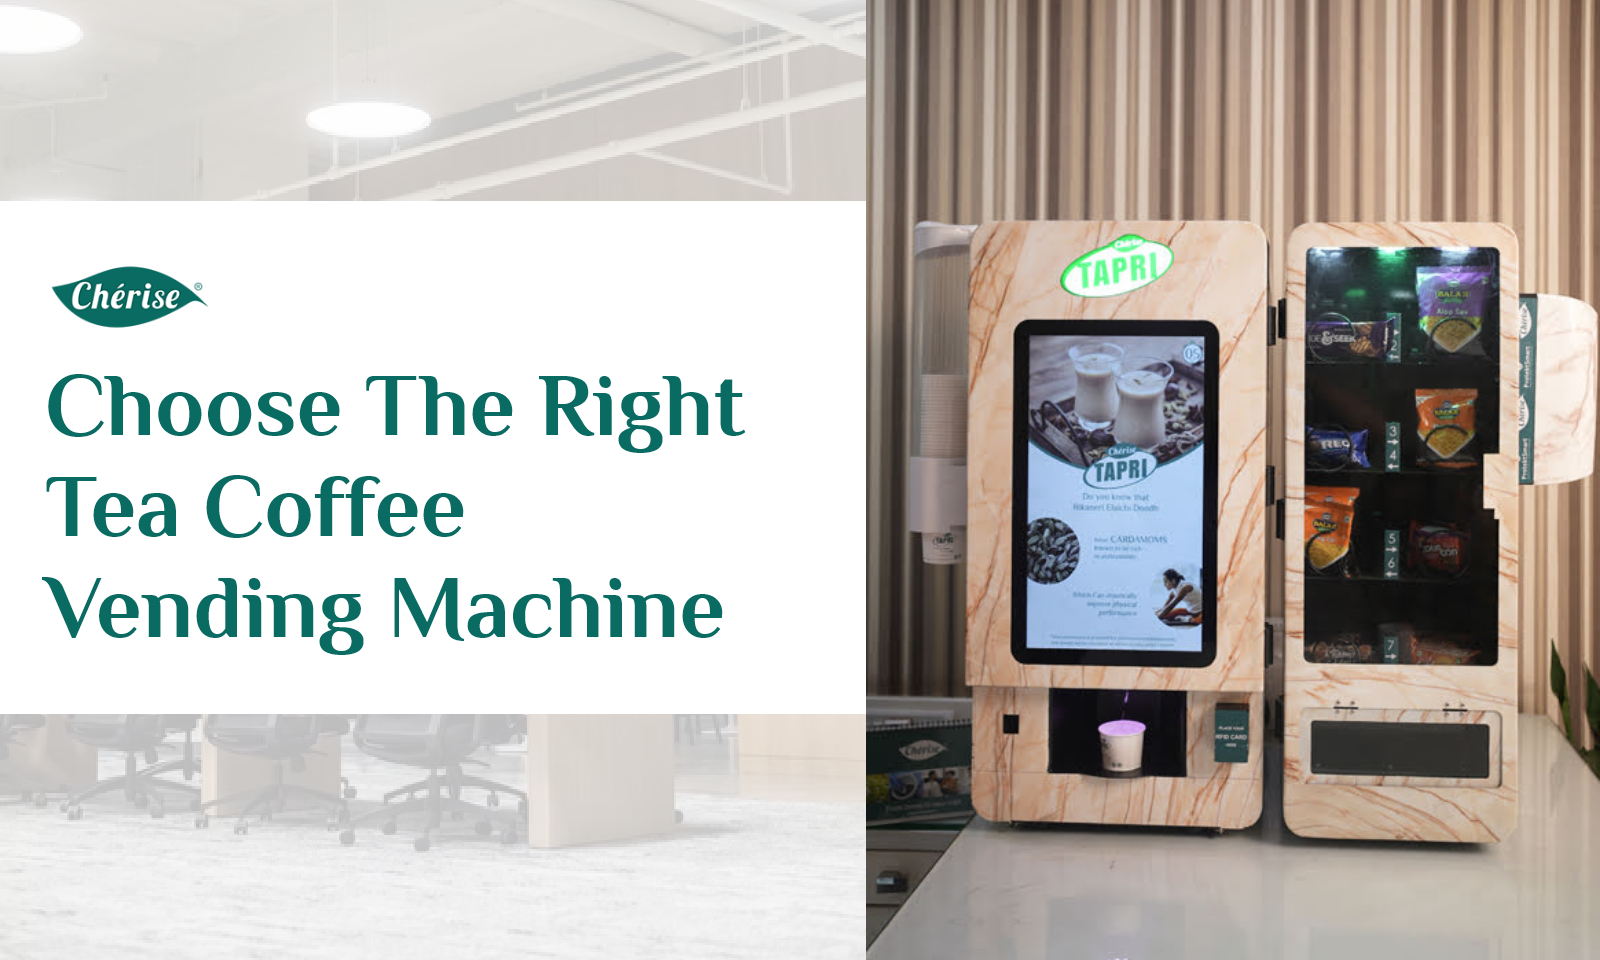 How to Choose the Right Tea Coffee Vending Machine Business?